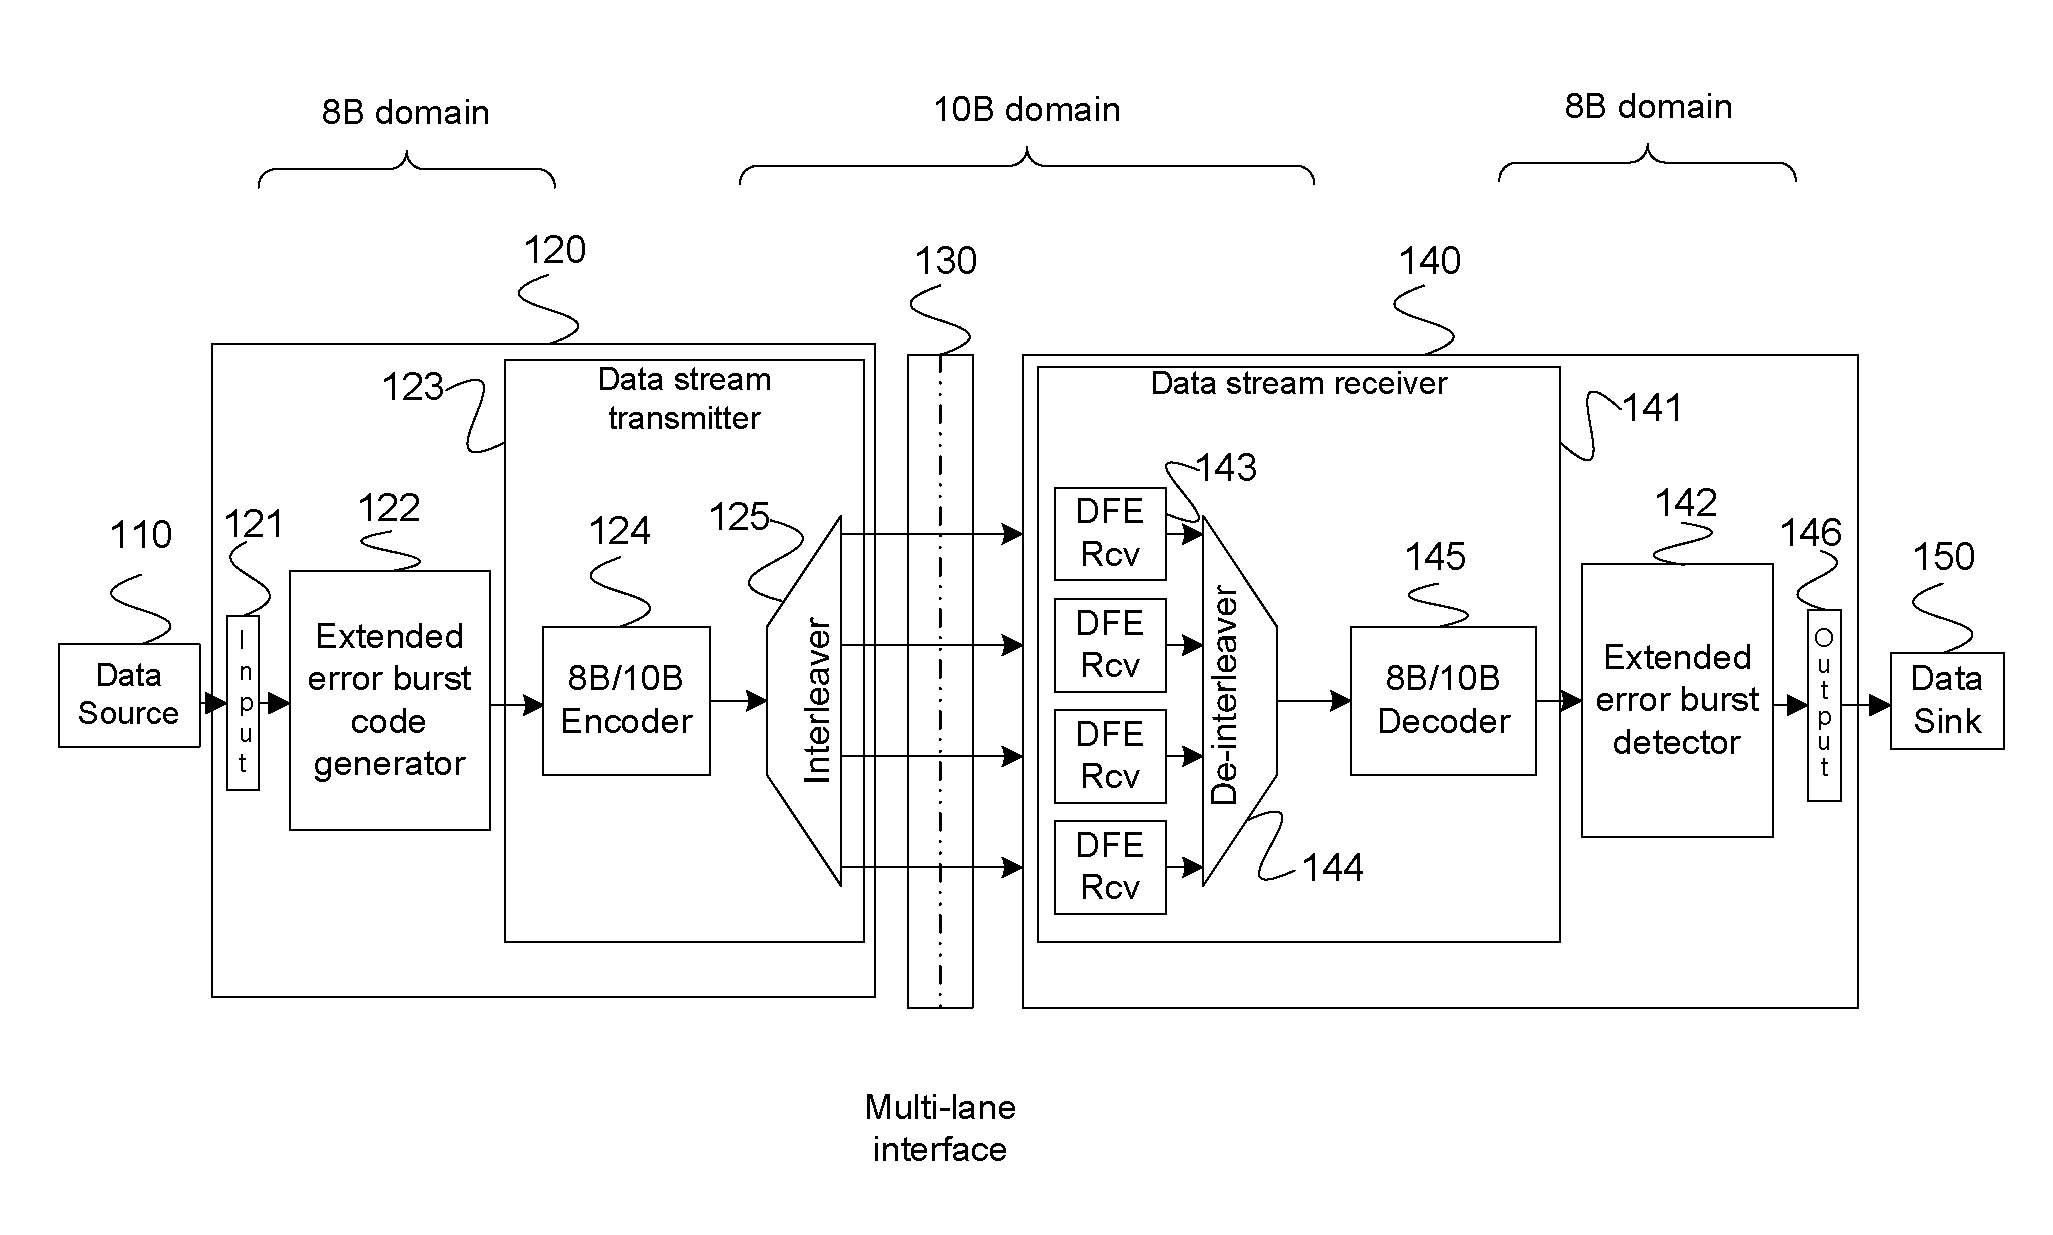 Apparatus and method for detecting extended error bursts